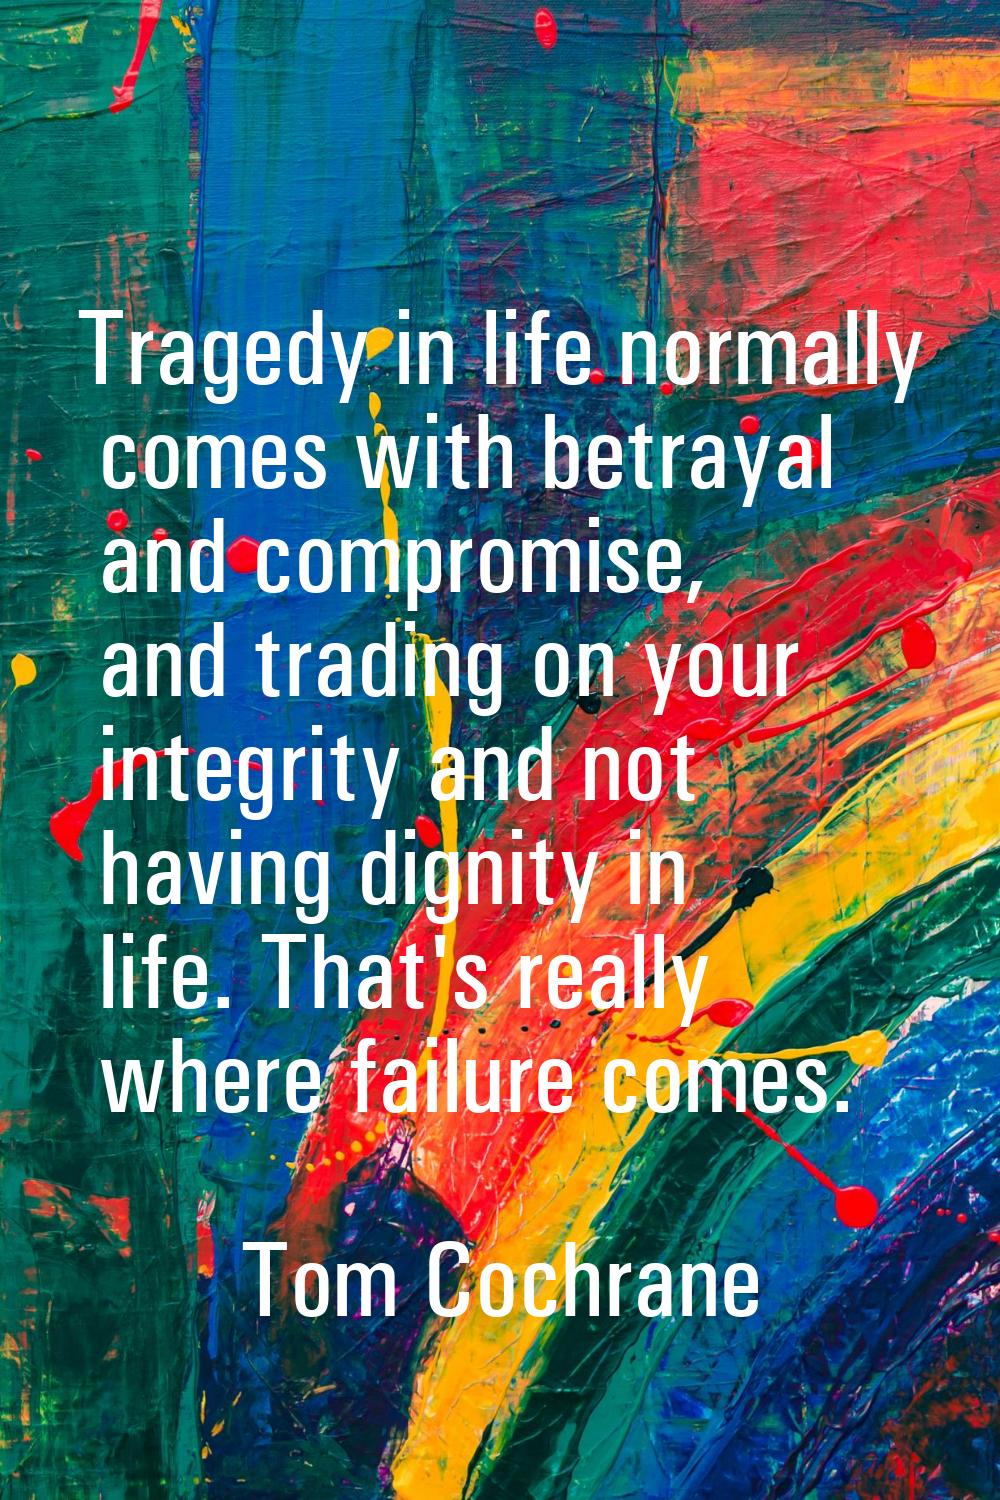 Tragedy in life normally comes with betrayal and compromise, and trading on your integrity and not 